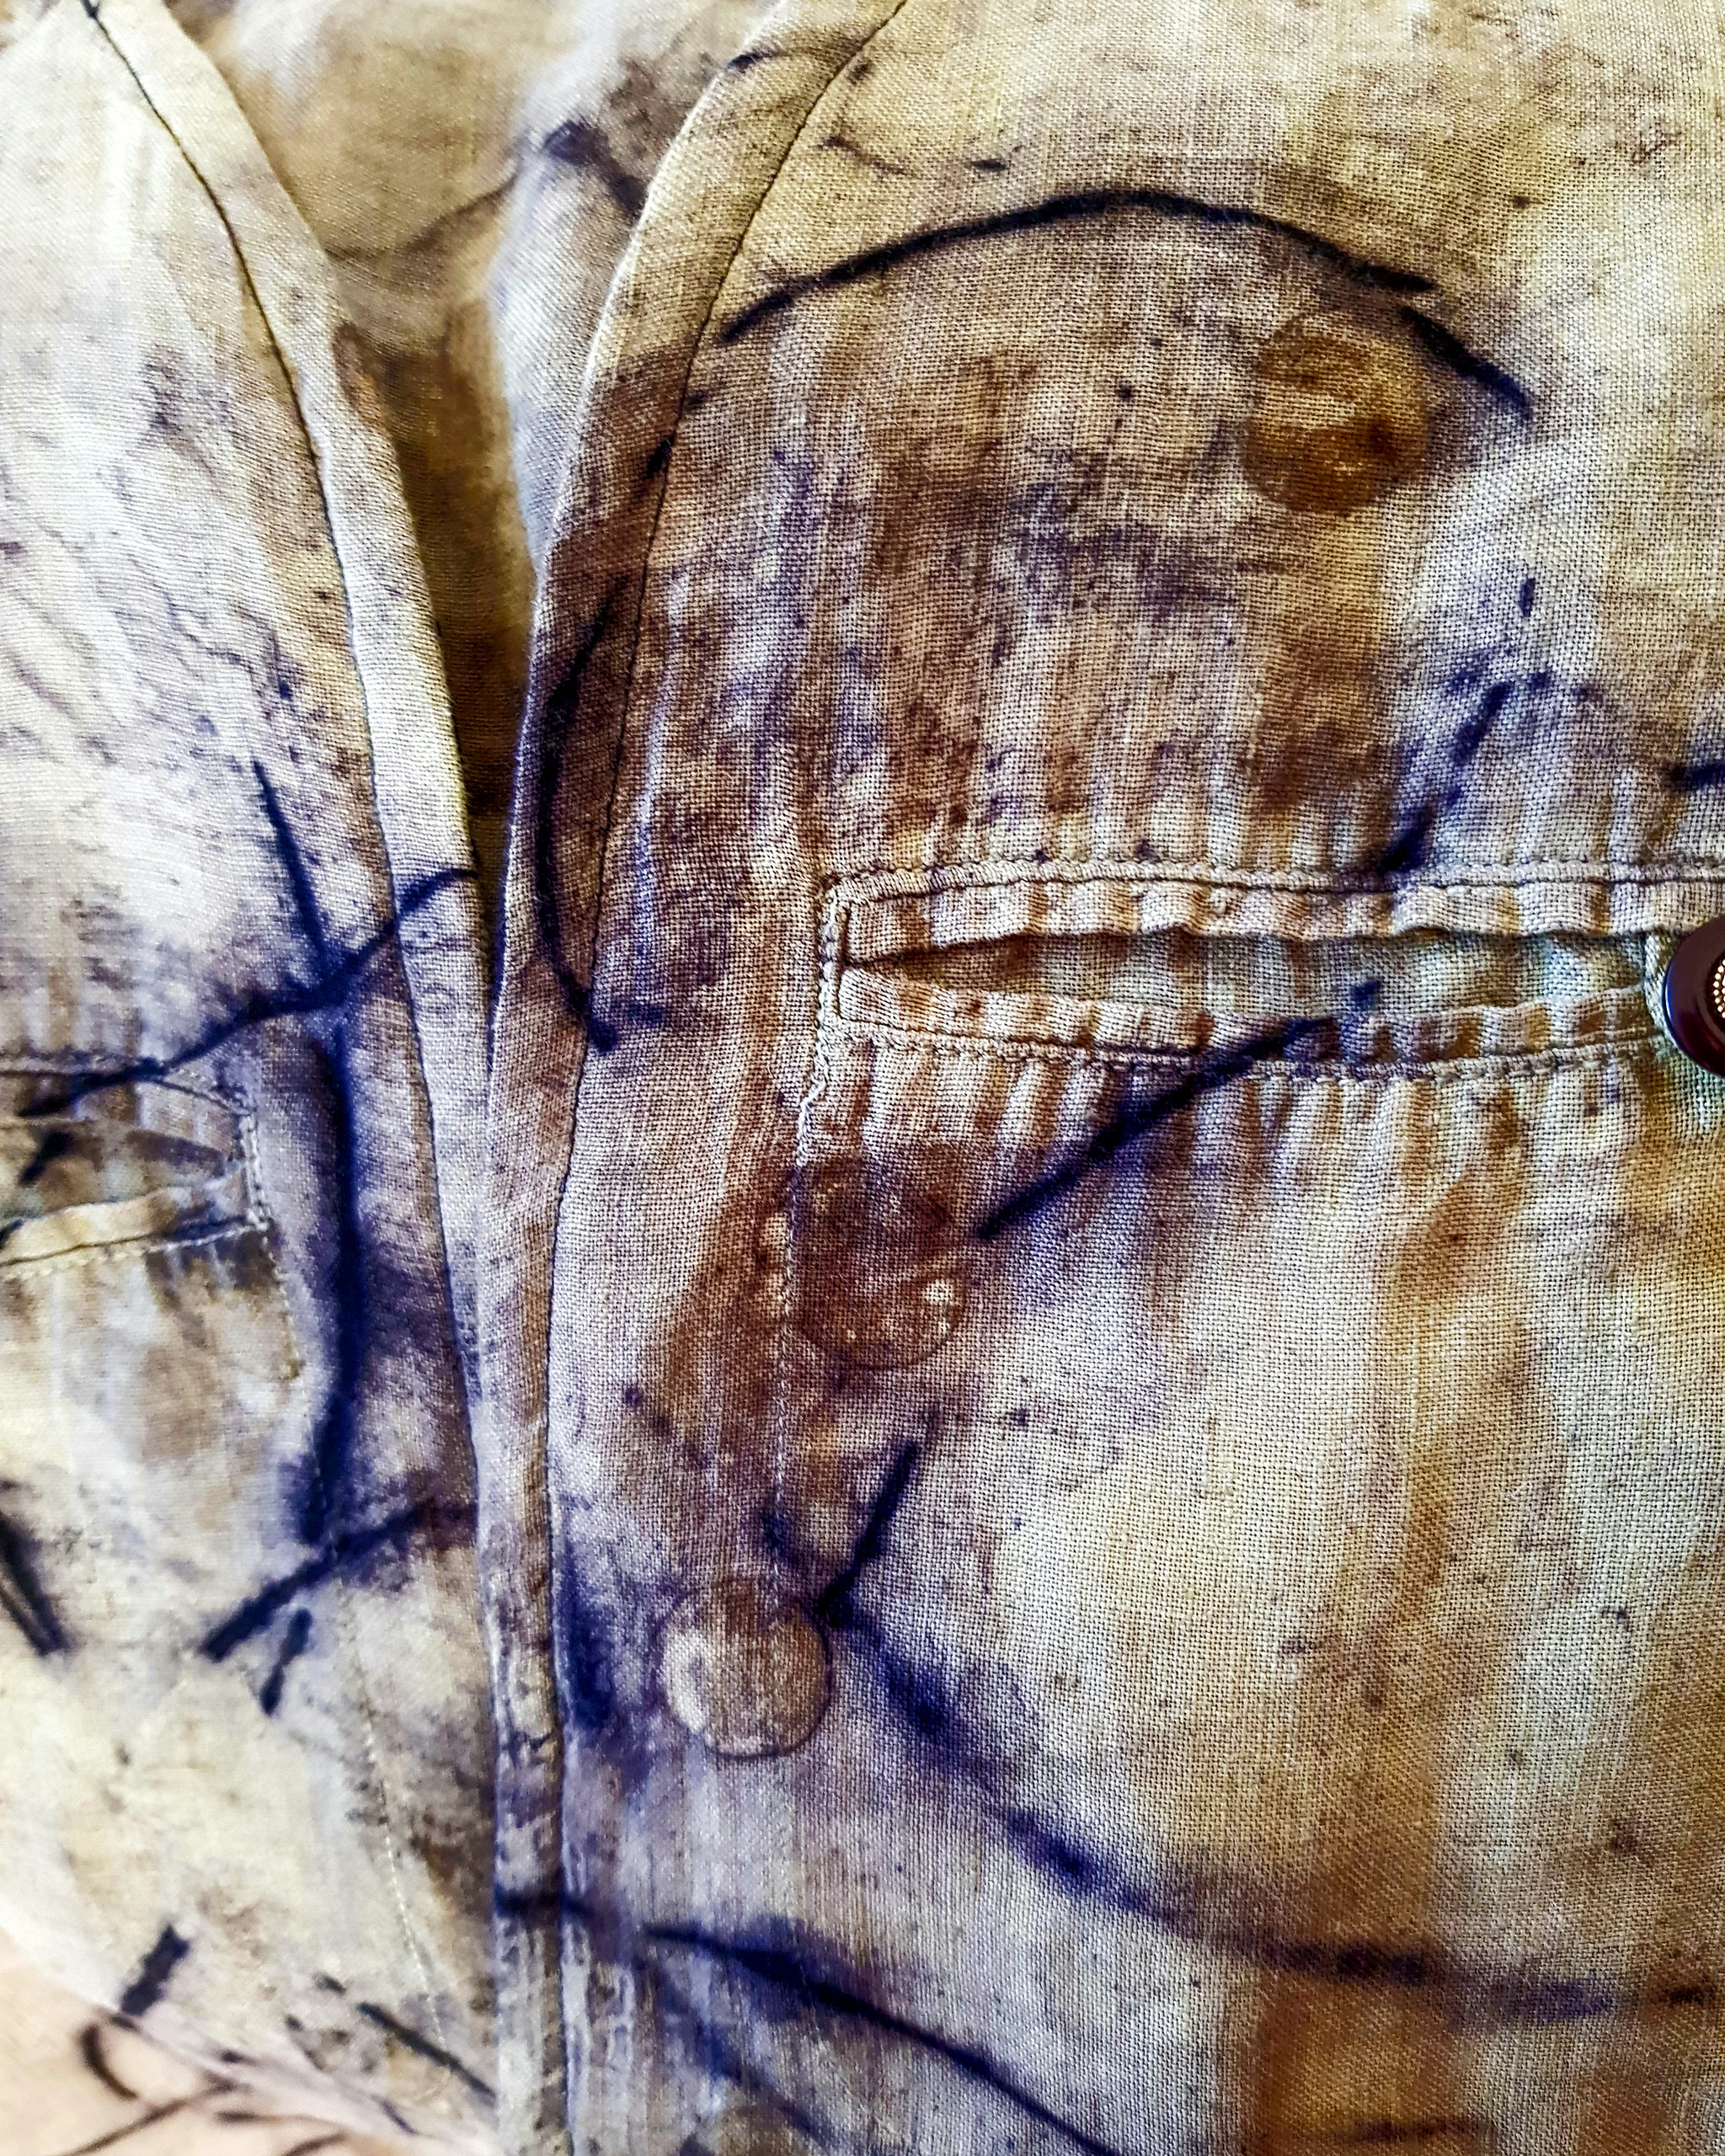 The image shows a close up of eco-dyed fabric for the Textile Art Retreat Found, Collected, Dyed, Stitched with Textile Artist Aujke Boonstra Art Trails Tasmania for her workshop at the Tin Dragon Trails Cottages